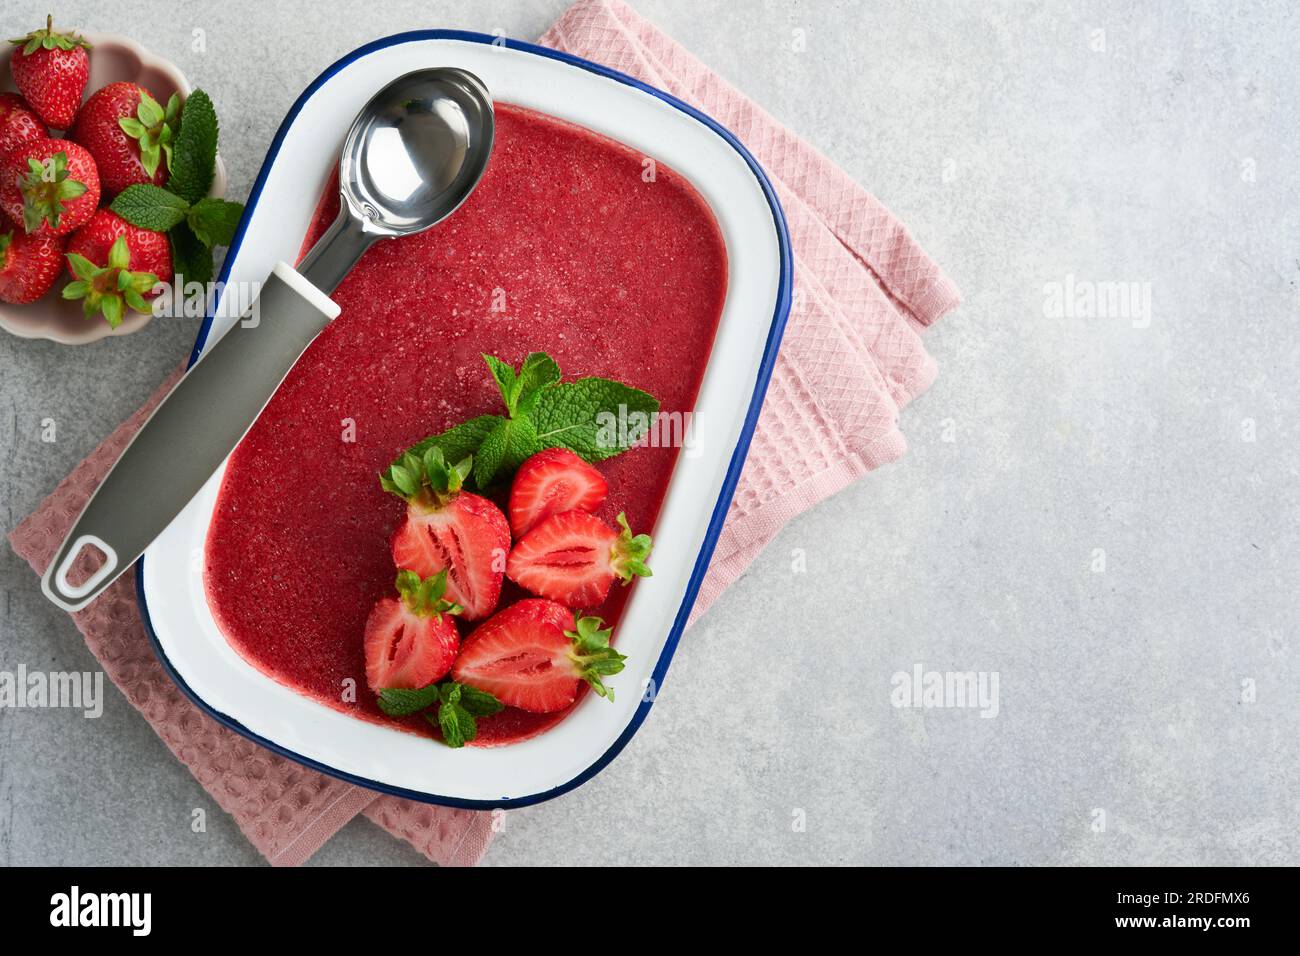 Strawberry granita or fresh berry sorbet in white rustic bowl on gray concrete background. Ice cream with strawberry and mint. Summer treat. Top view. Stock Photo